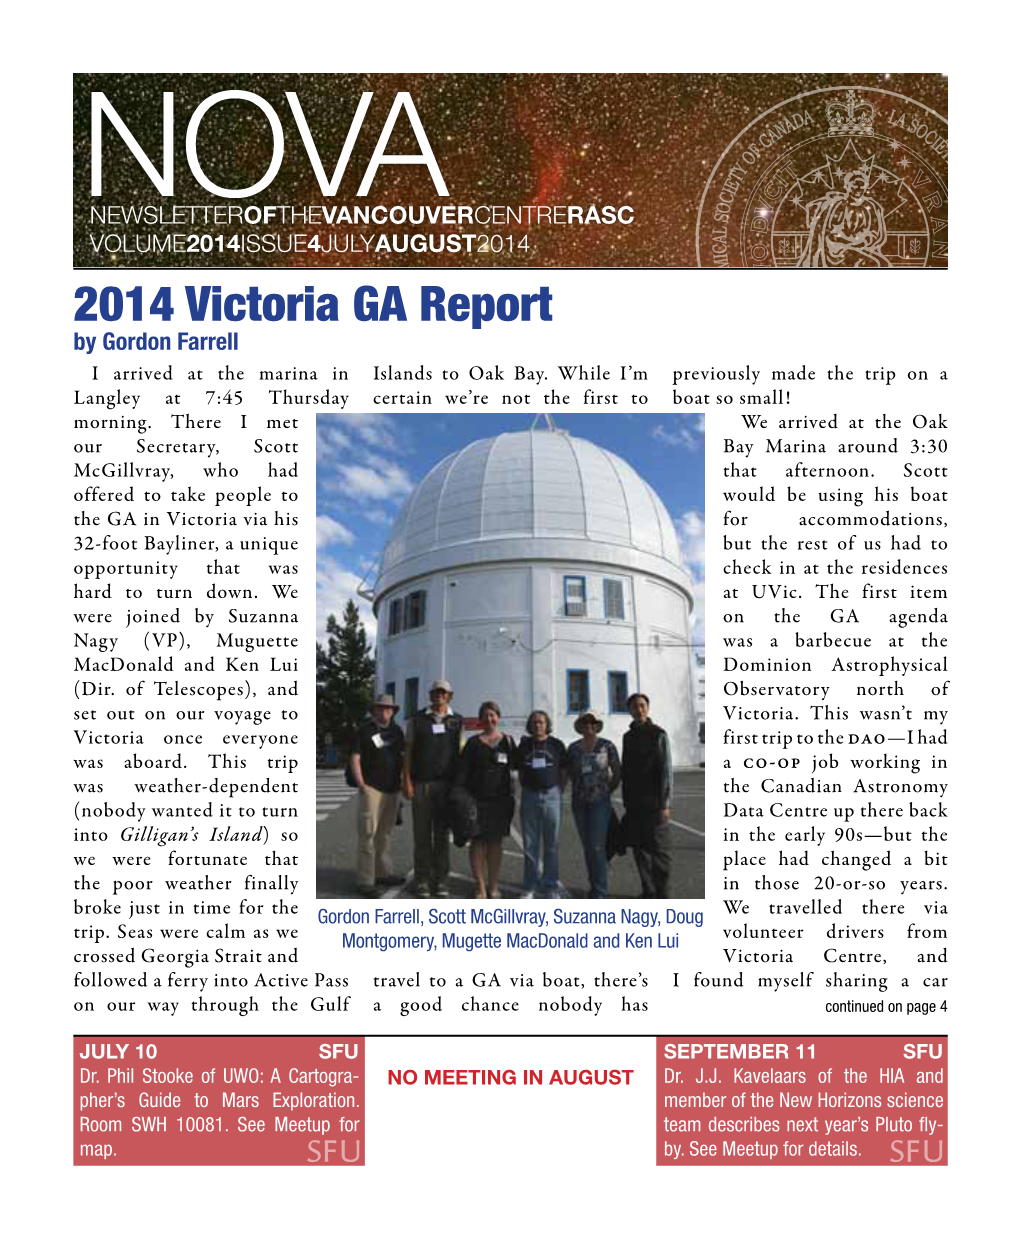 2014 Victoria GA Report by Gordon Farrell I Arrived at the Marina in Islands to Oak Bay